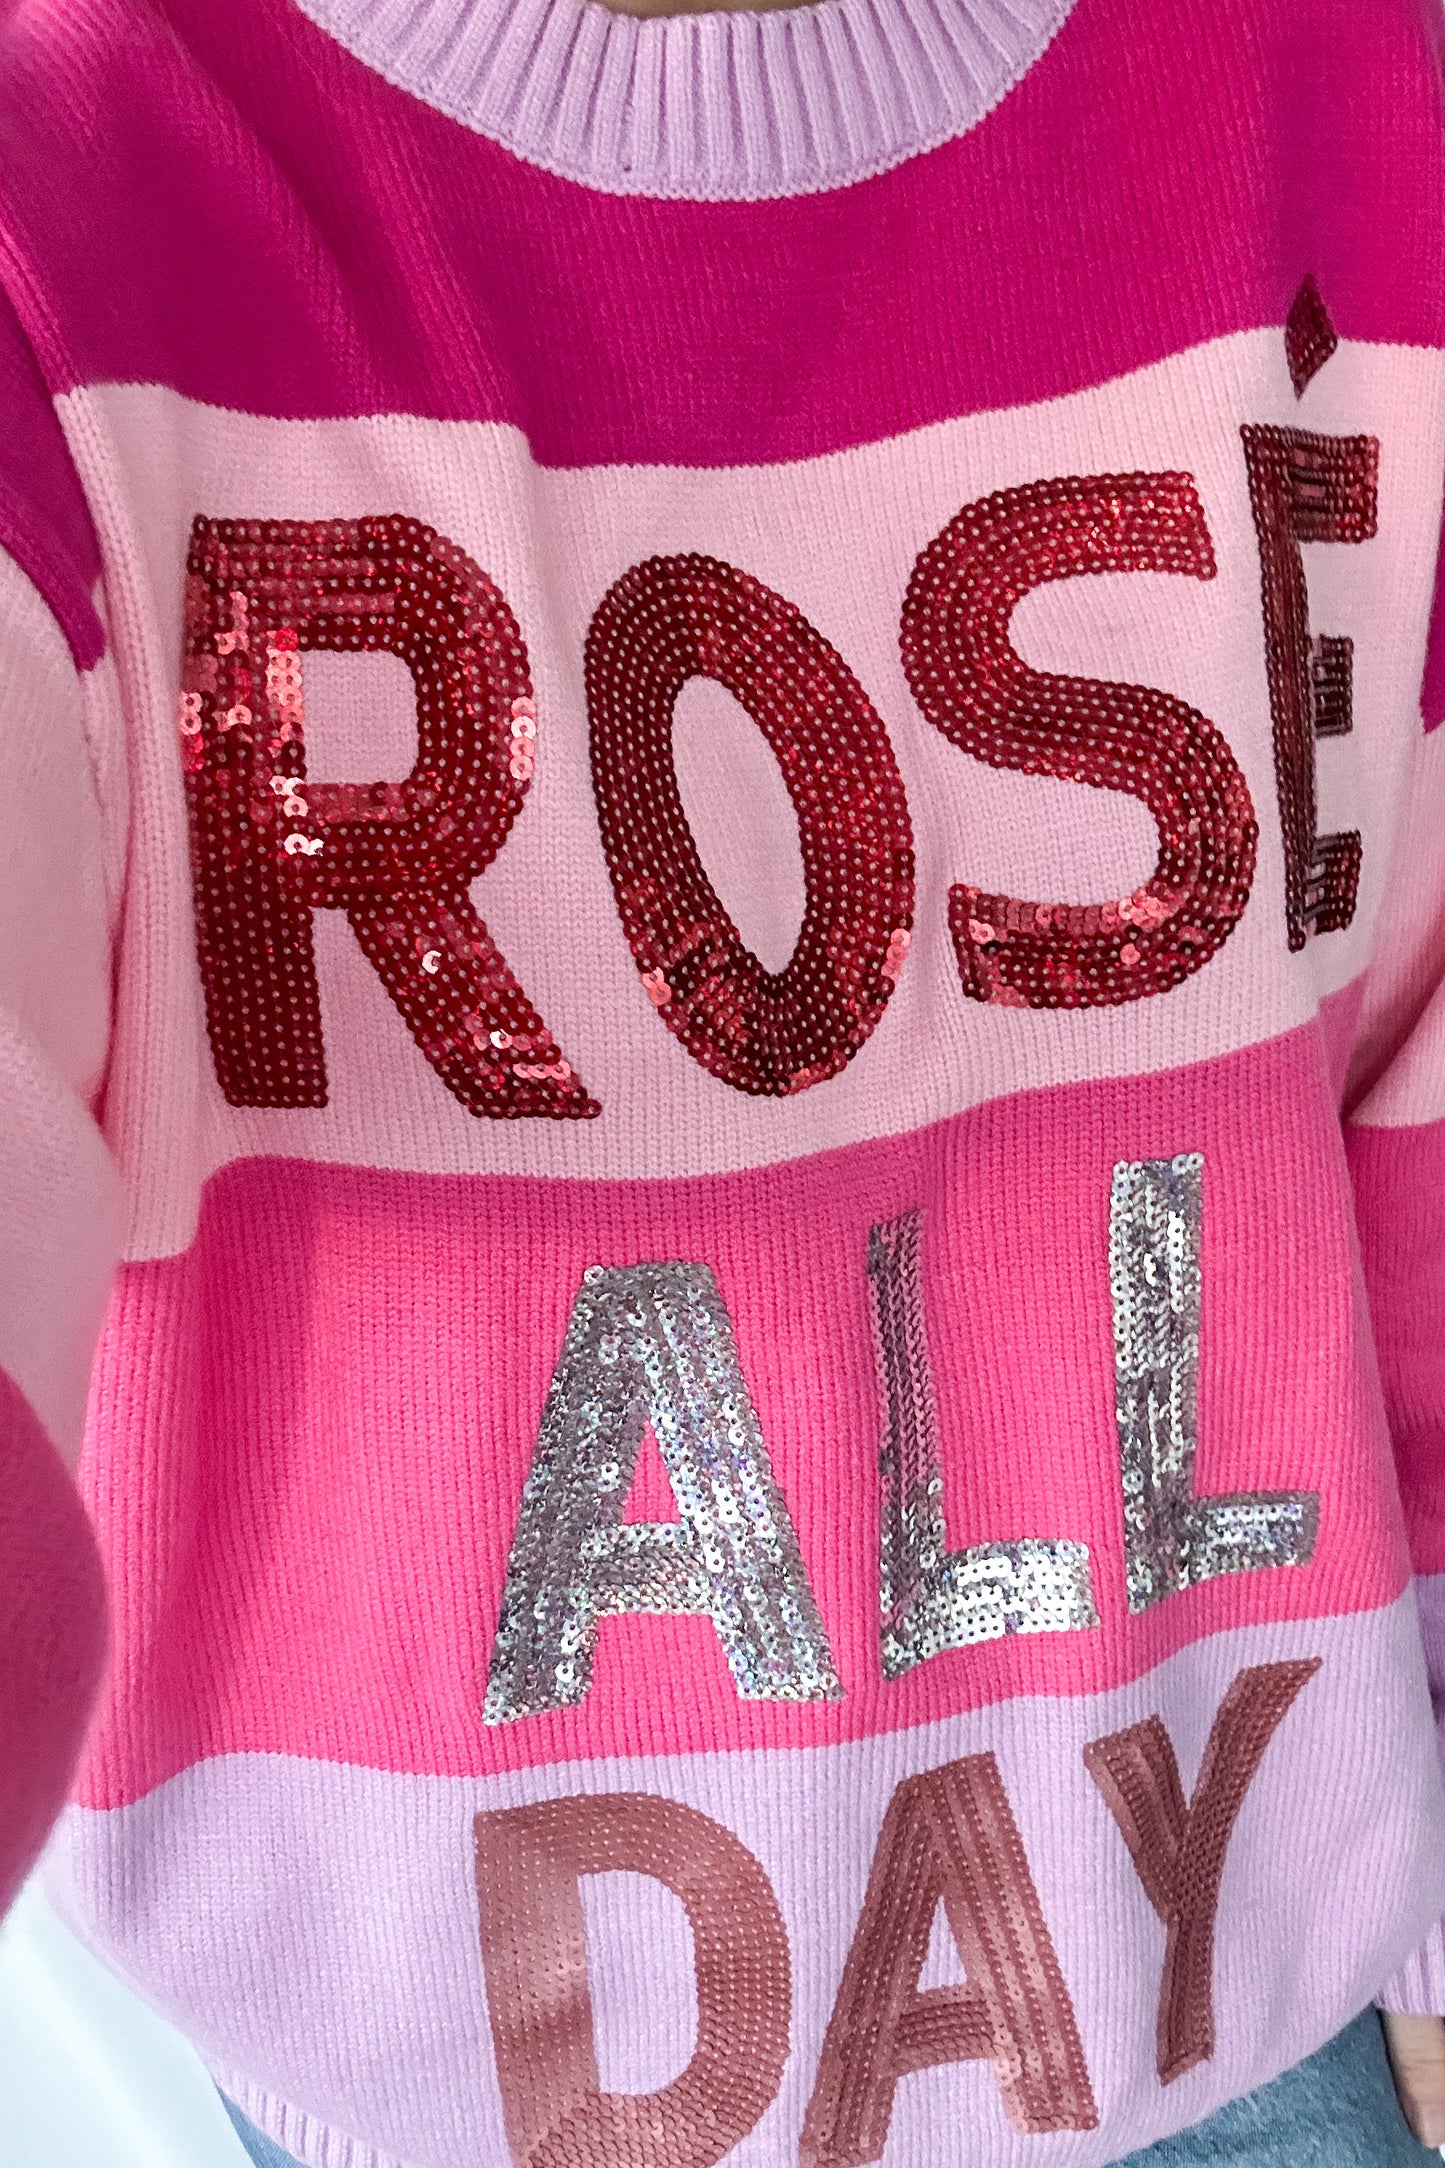 THE ROSE ALL DAY SWEATER